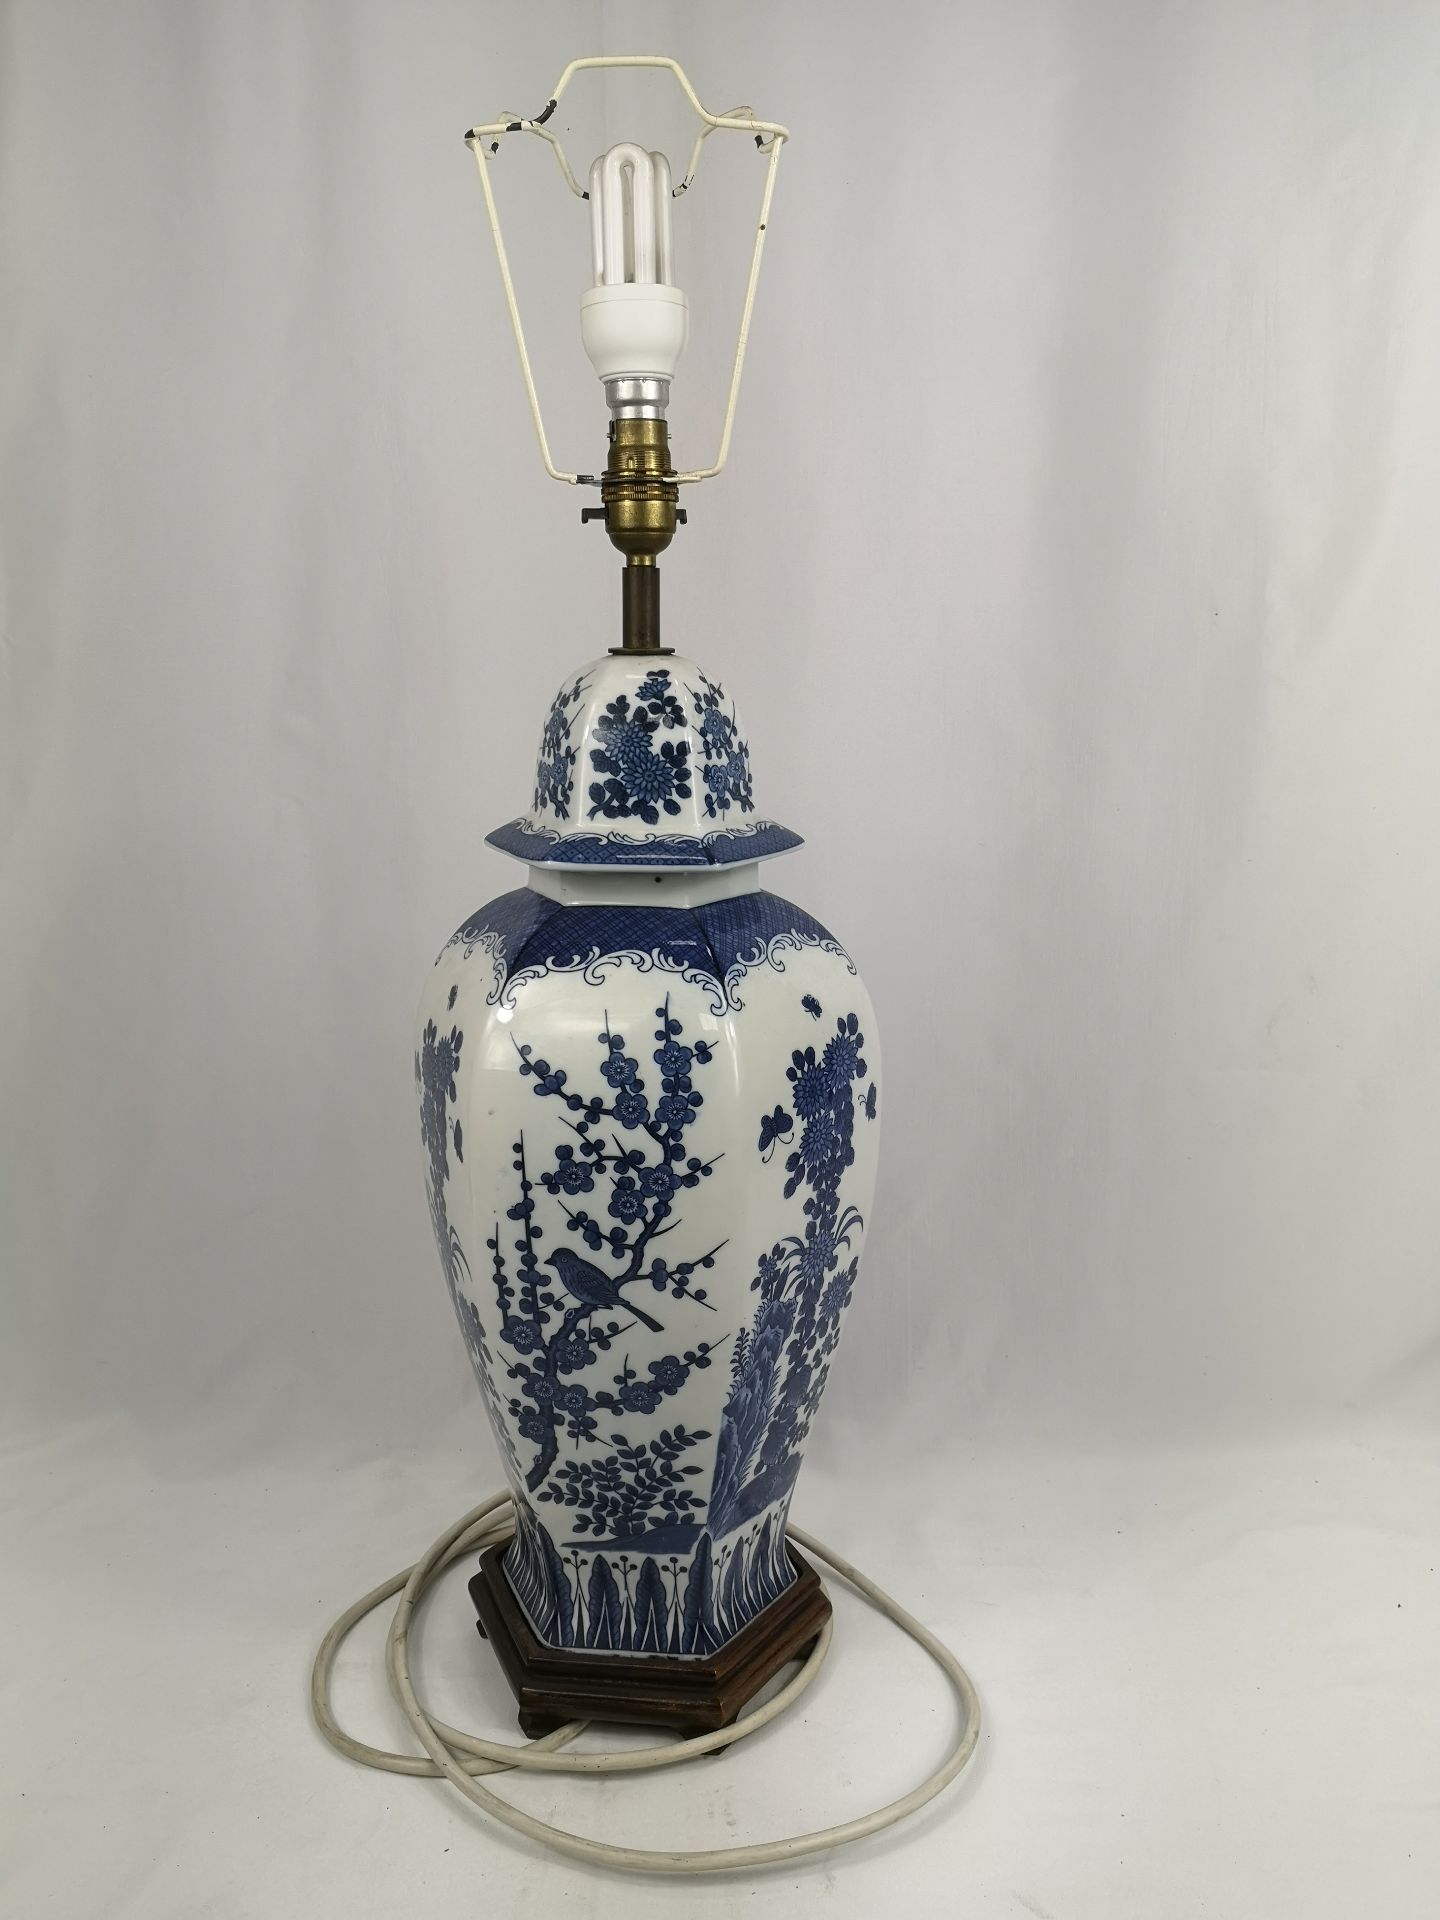 Contemporary blue and white, Oriental style table lamp - Image 5 of 5